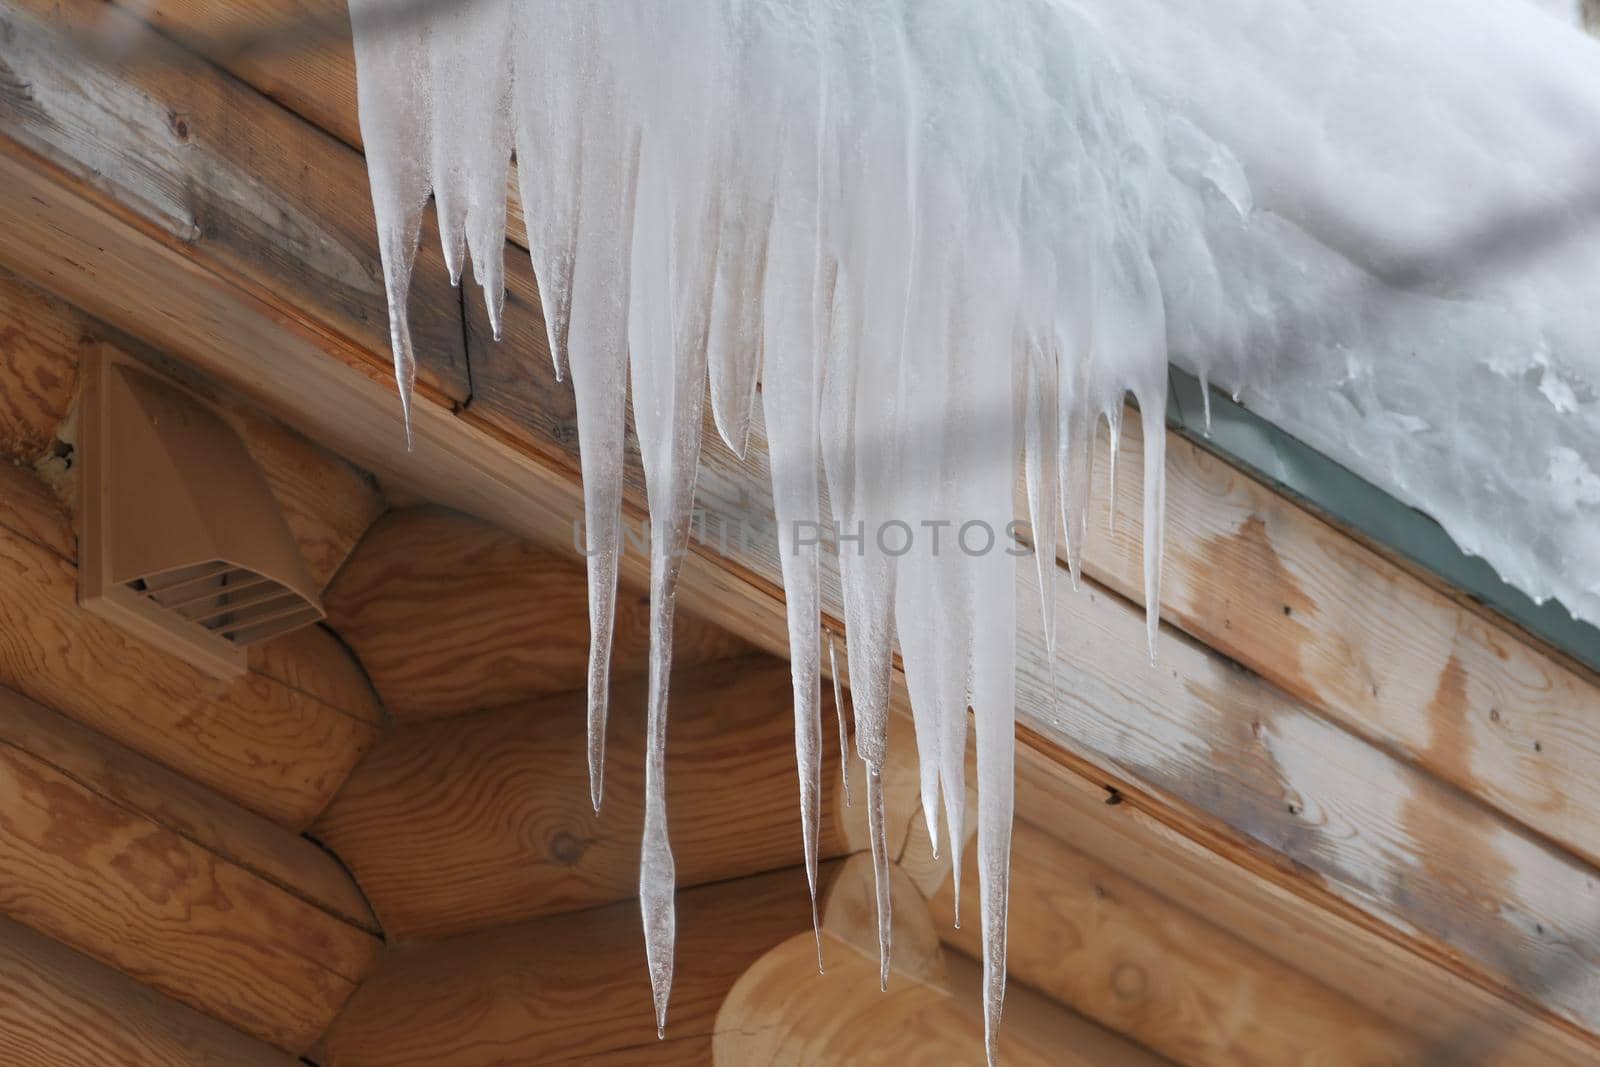 Large icicles hang from the roof of a log house. Winter frost and spring drops. High quality photo